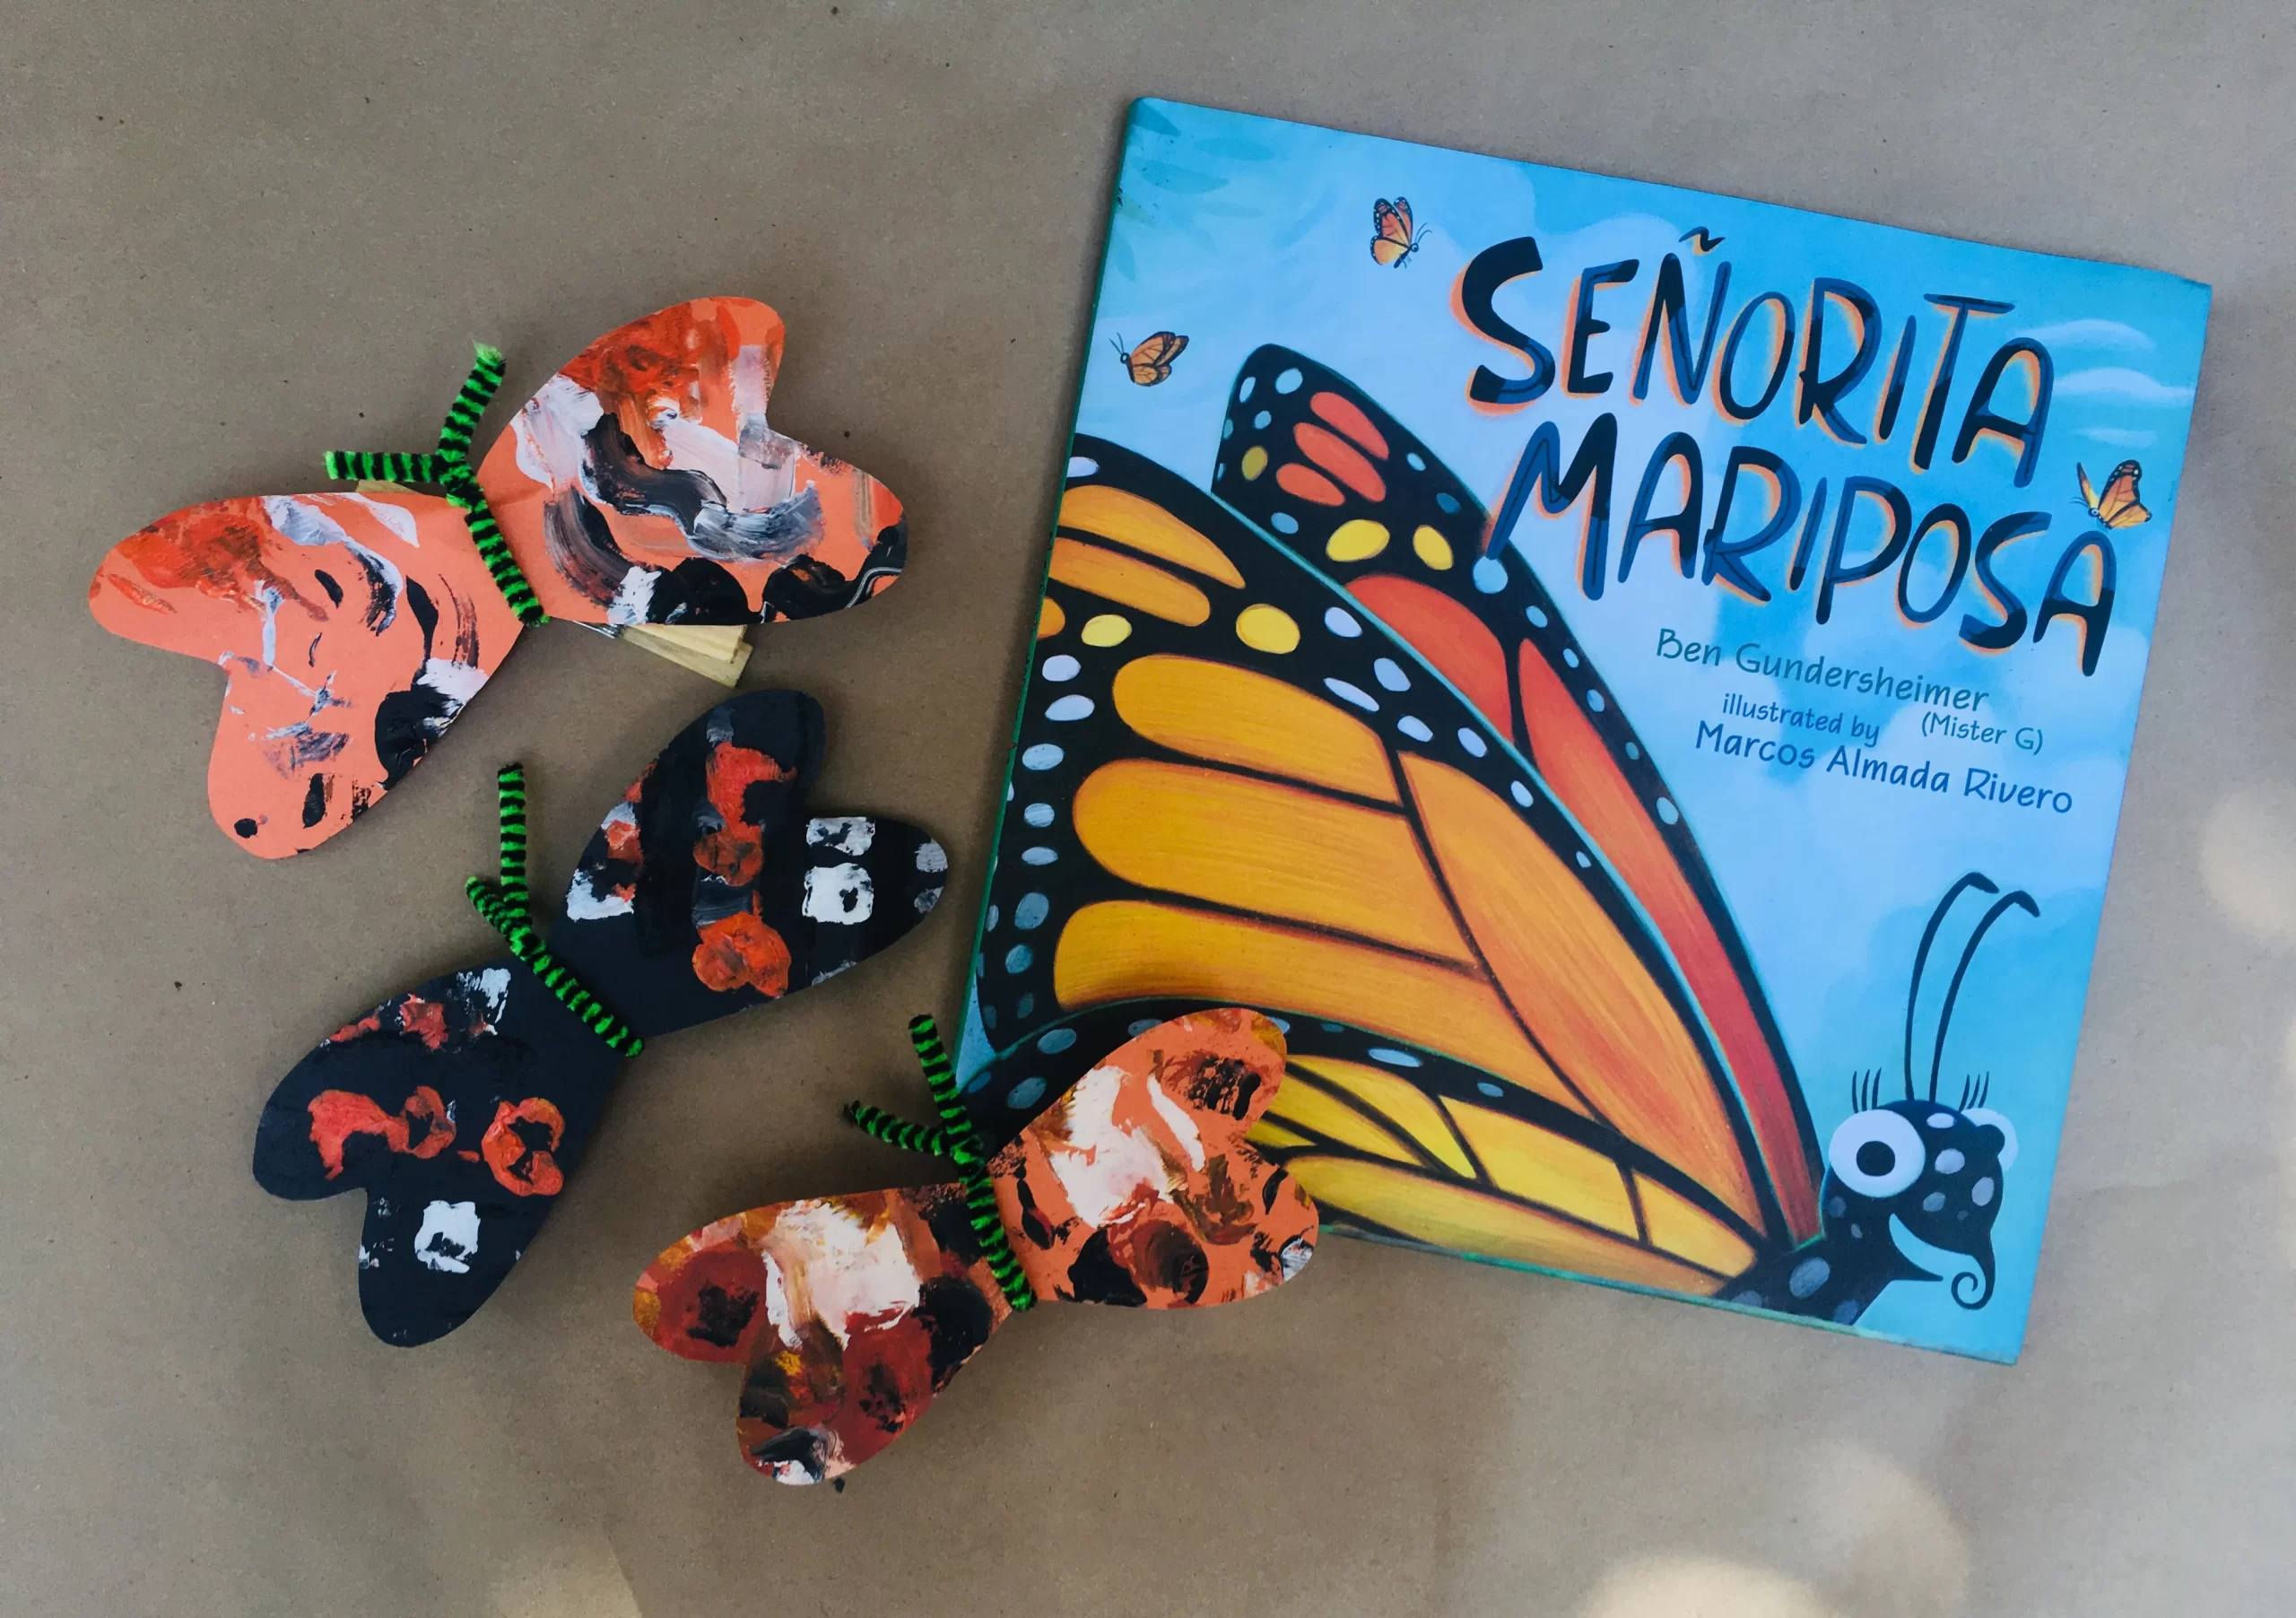 Cover of the book Señorita Mariposa, featuring a personified Monarch butterfly on a blue sky background. The book is surrounded by three examples of a butterfly craft.